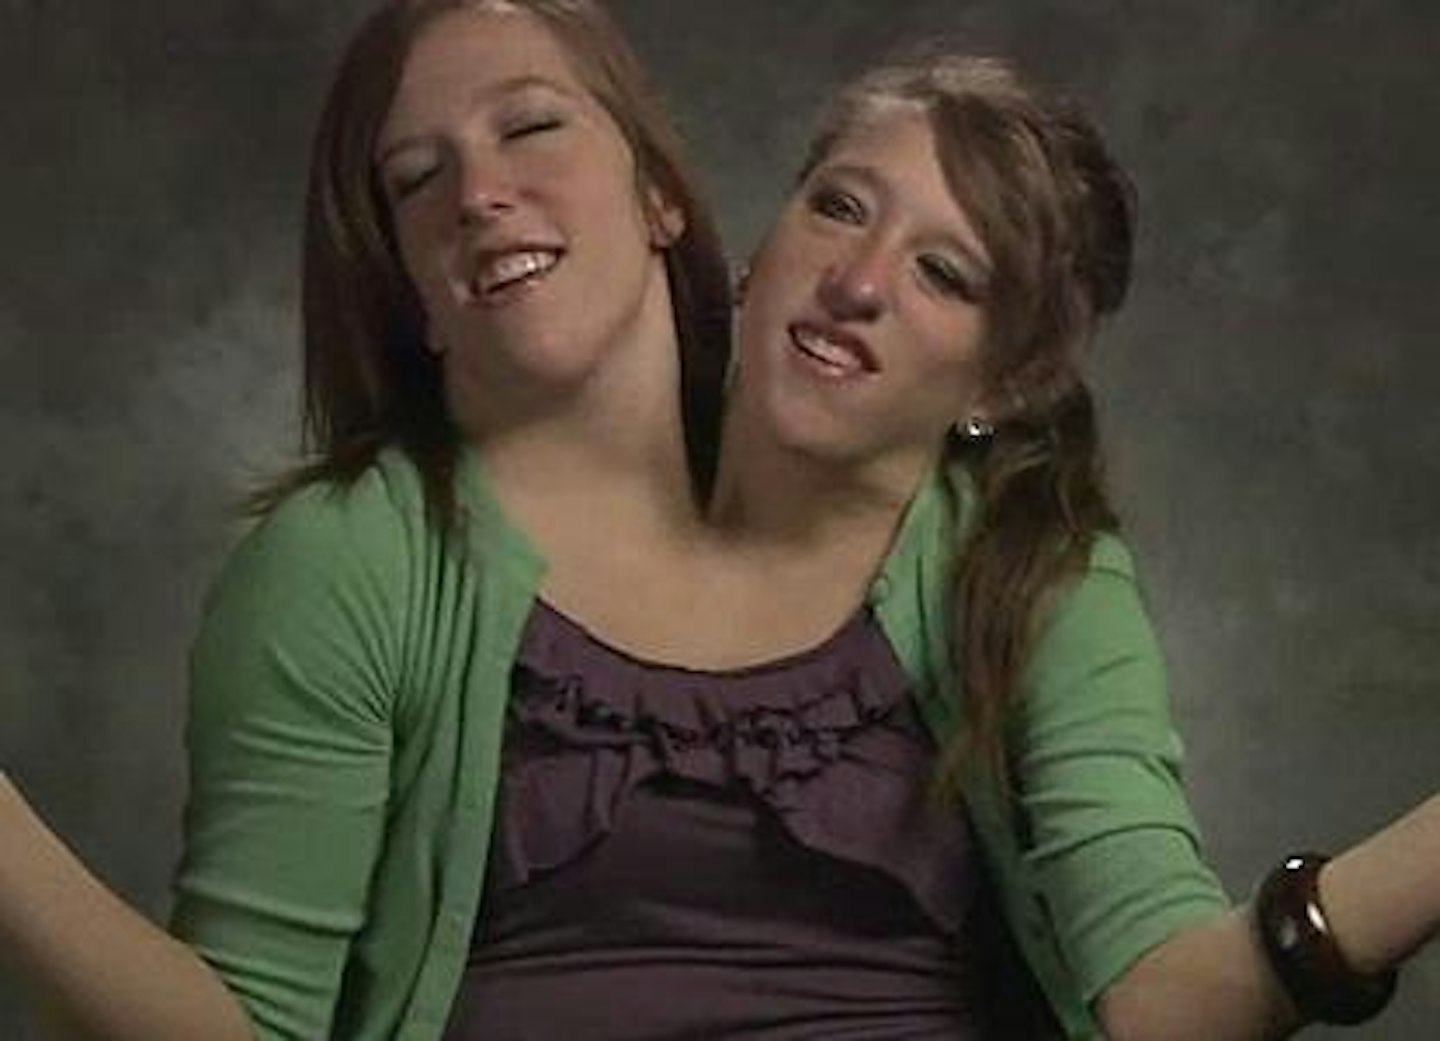 Amazing story of conjoined twins Abigail and Brittany Hensel ...